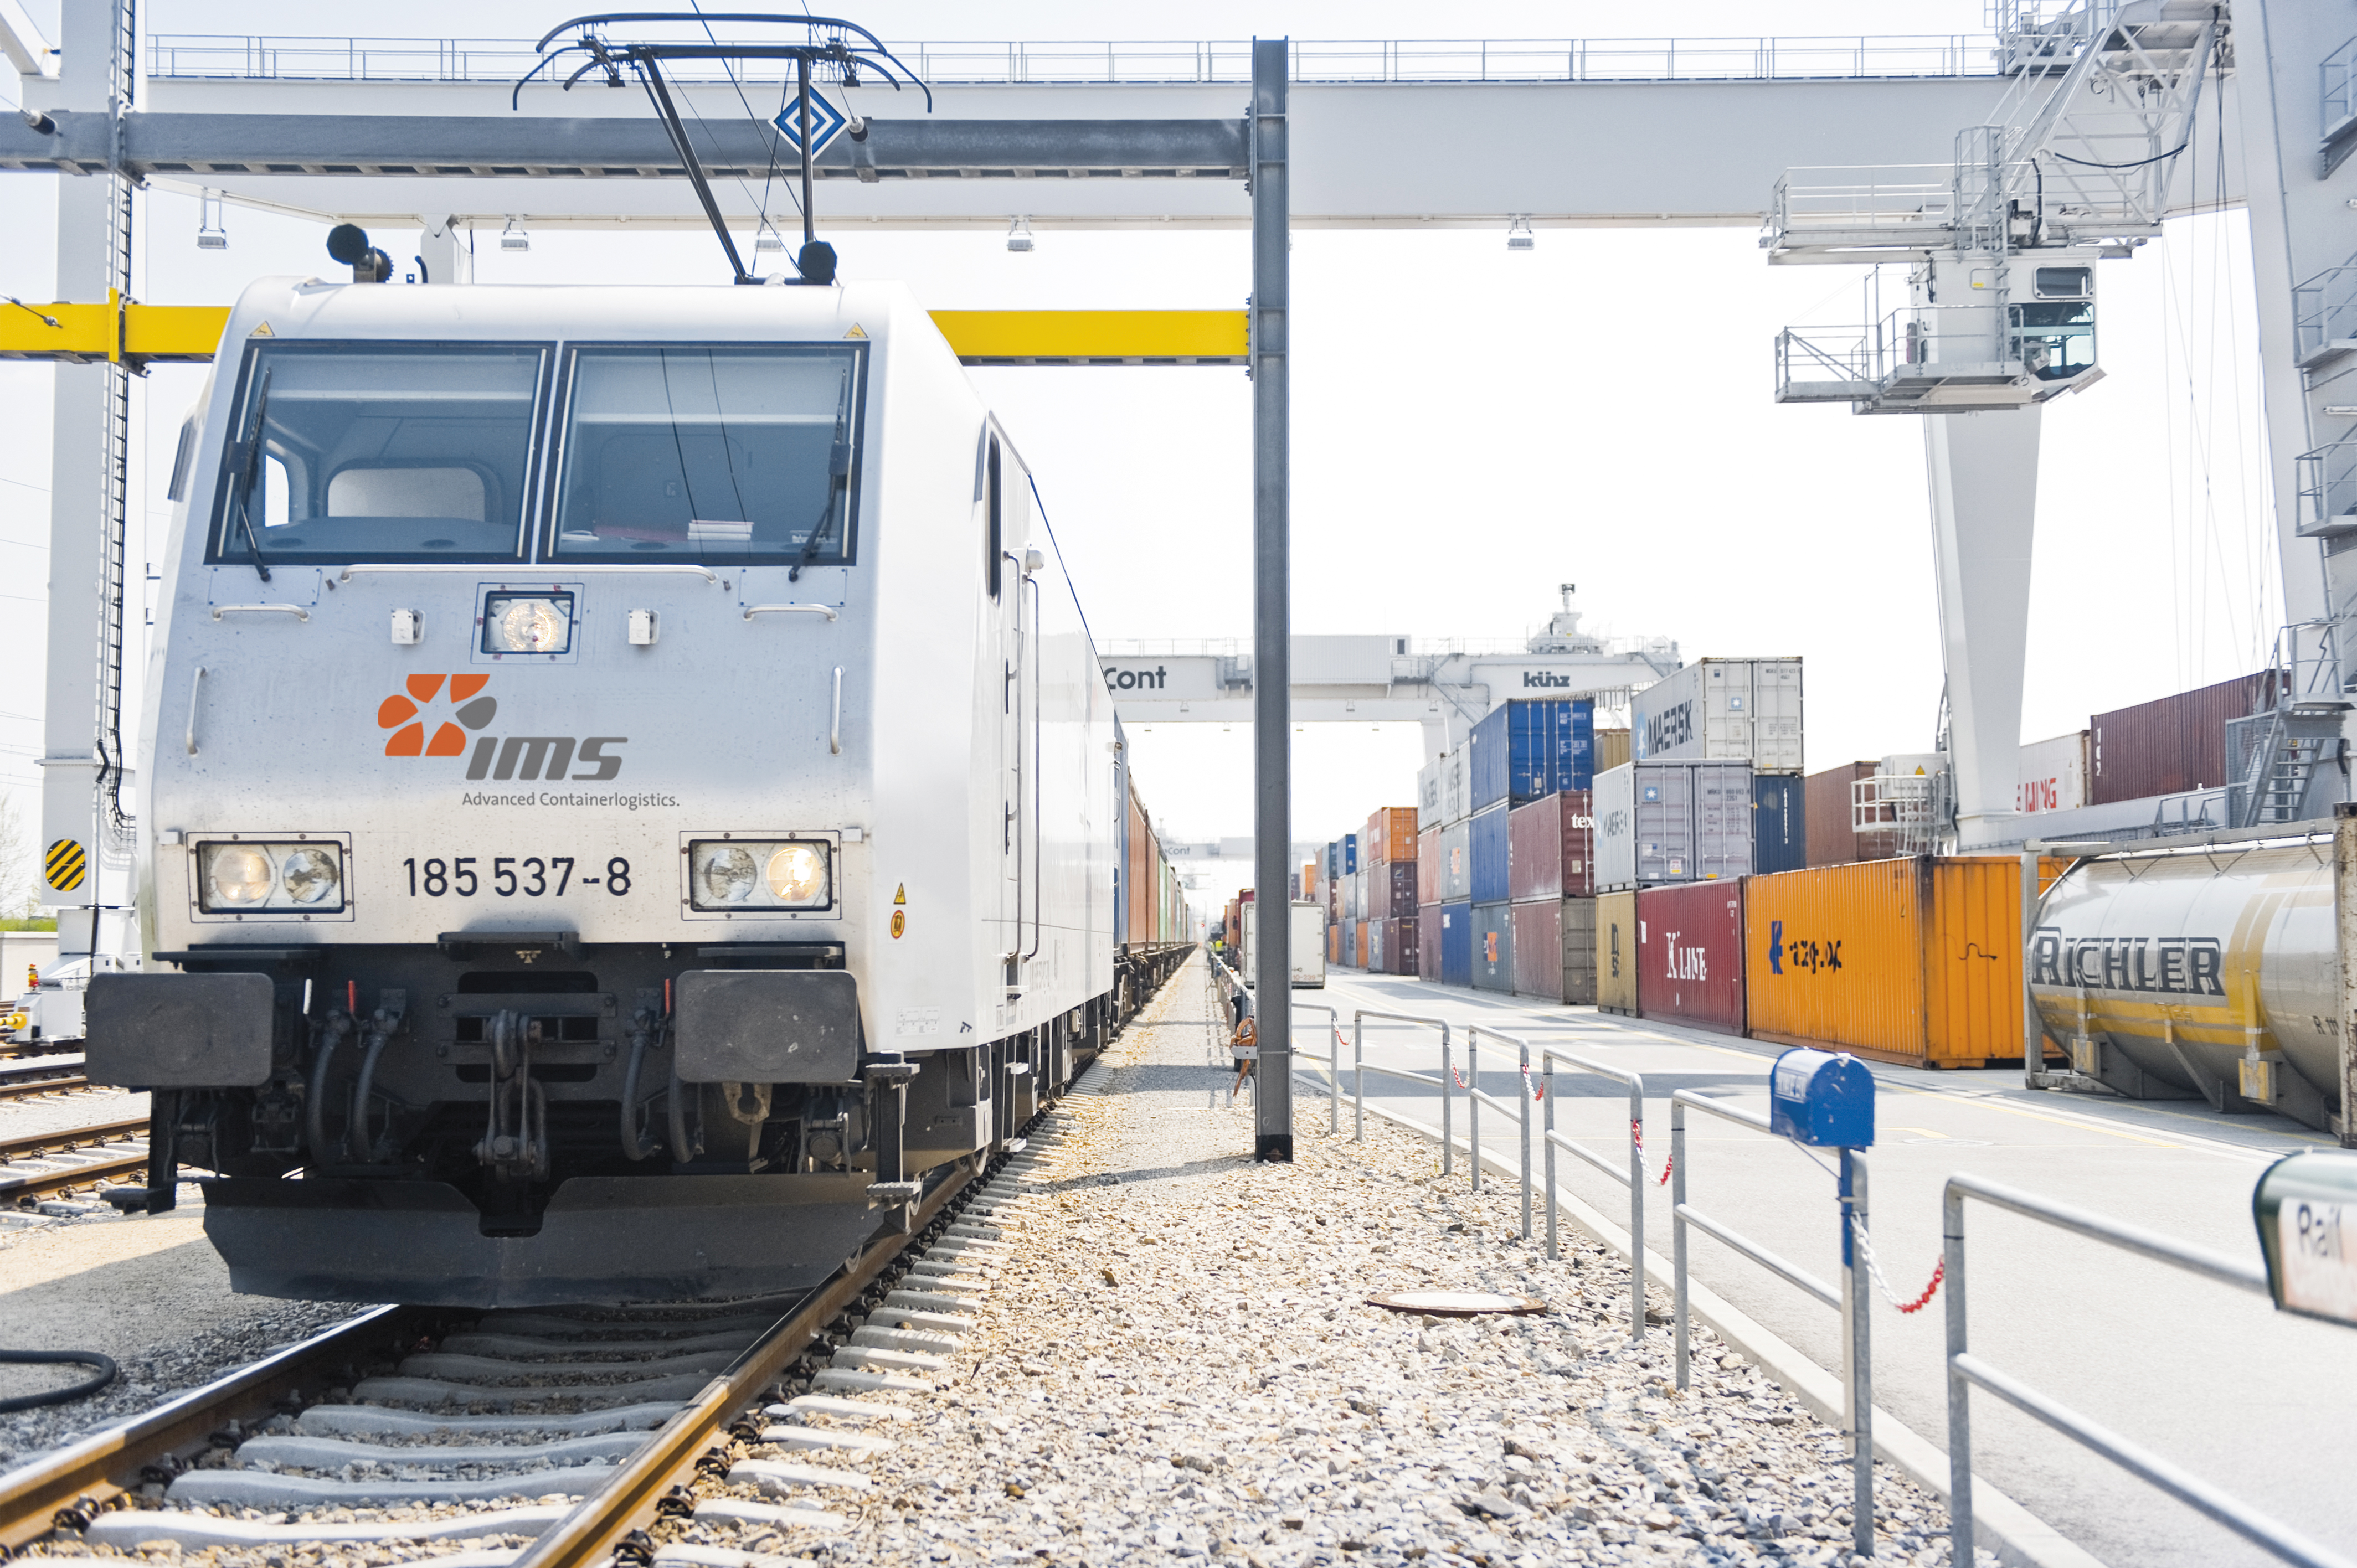 IMS Cargo increases round trips from Germanseaports to Enns